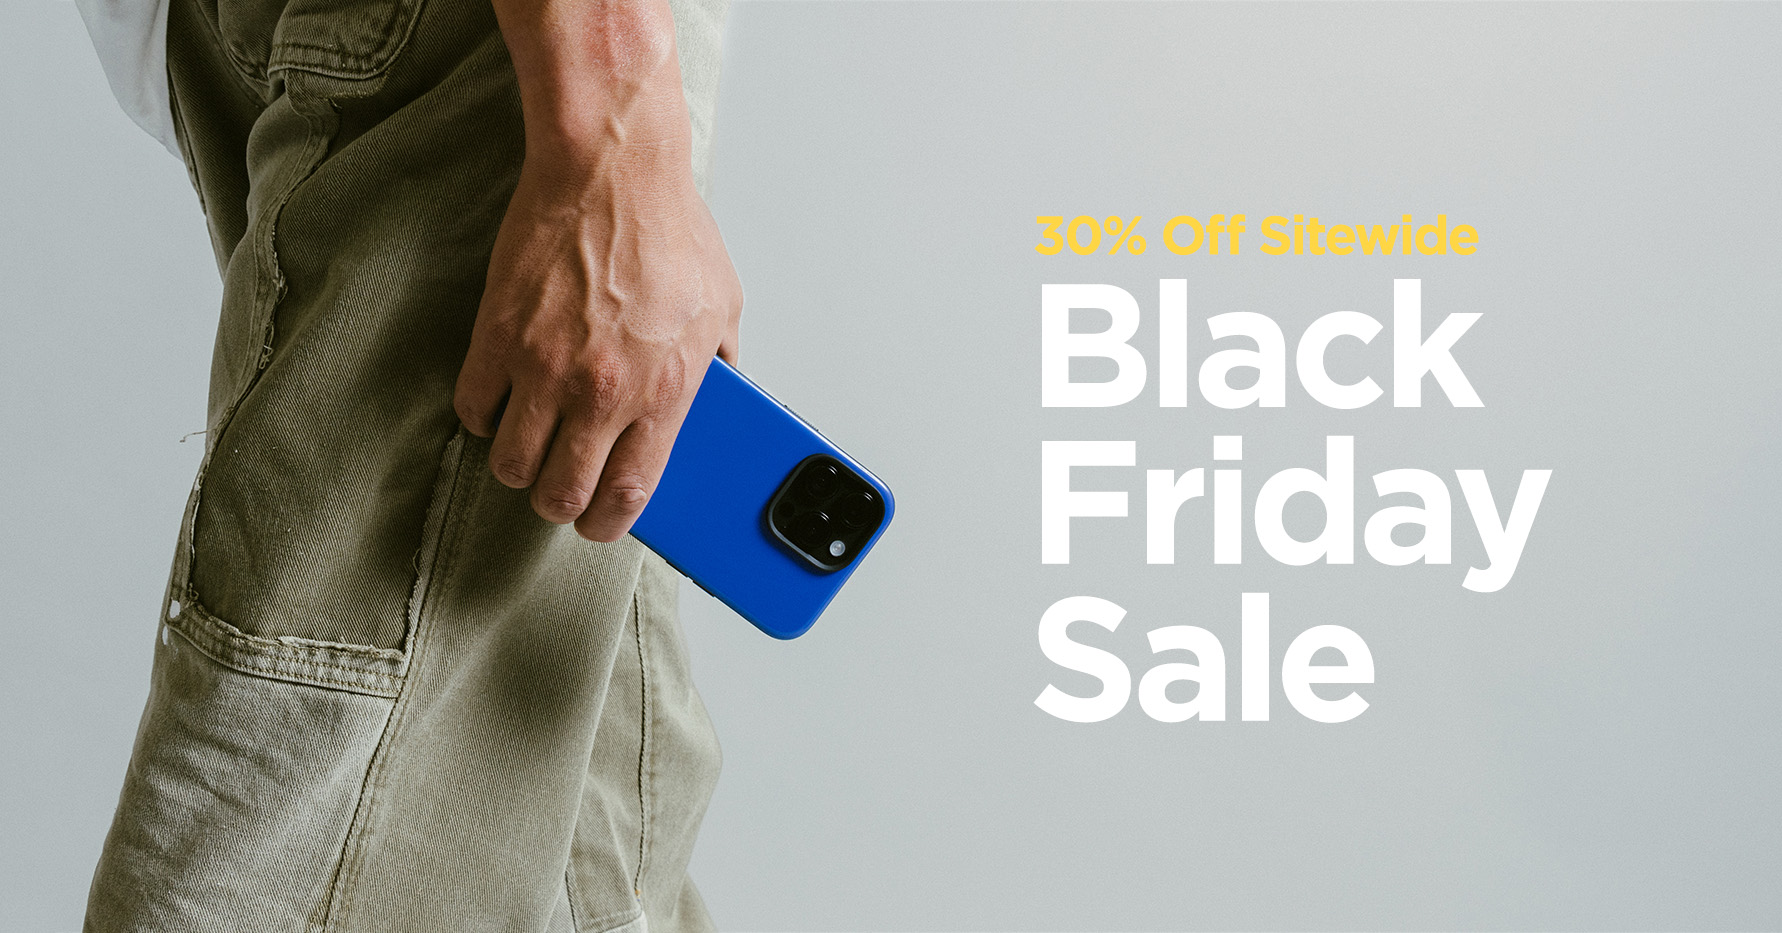 Nomad’s Black Friday sale is now live with 30% off cases, Apple Watch bands, chargers, and more